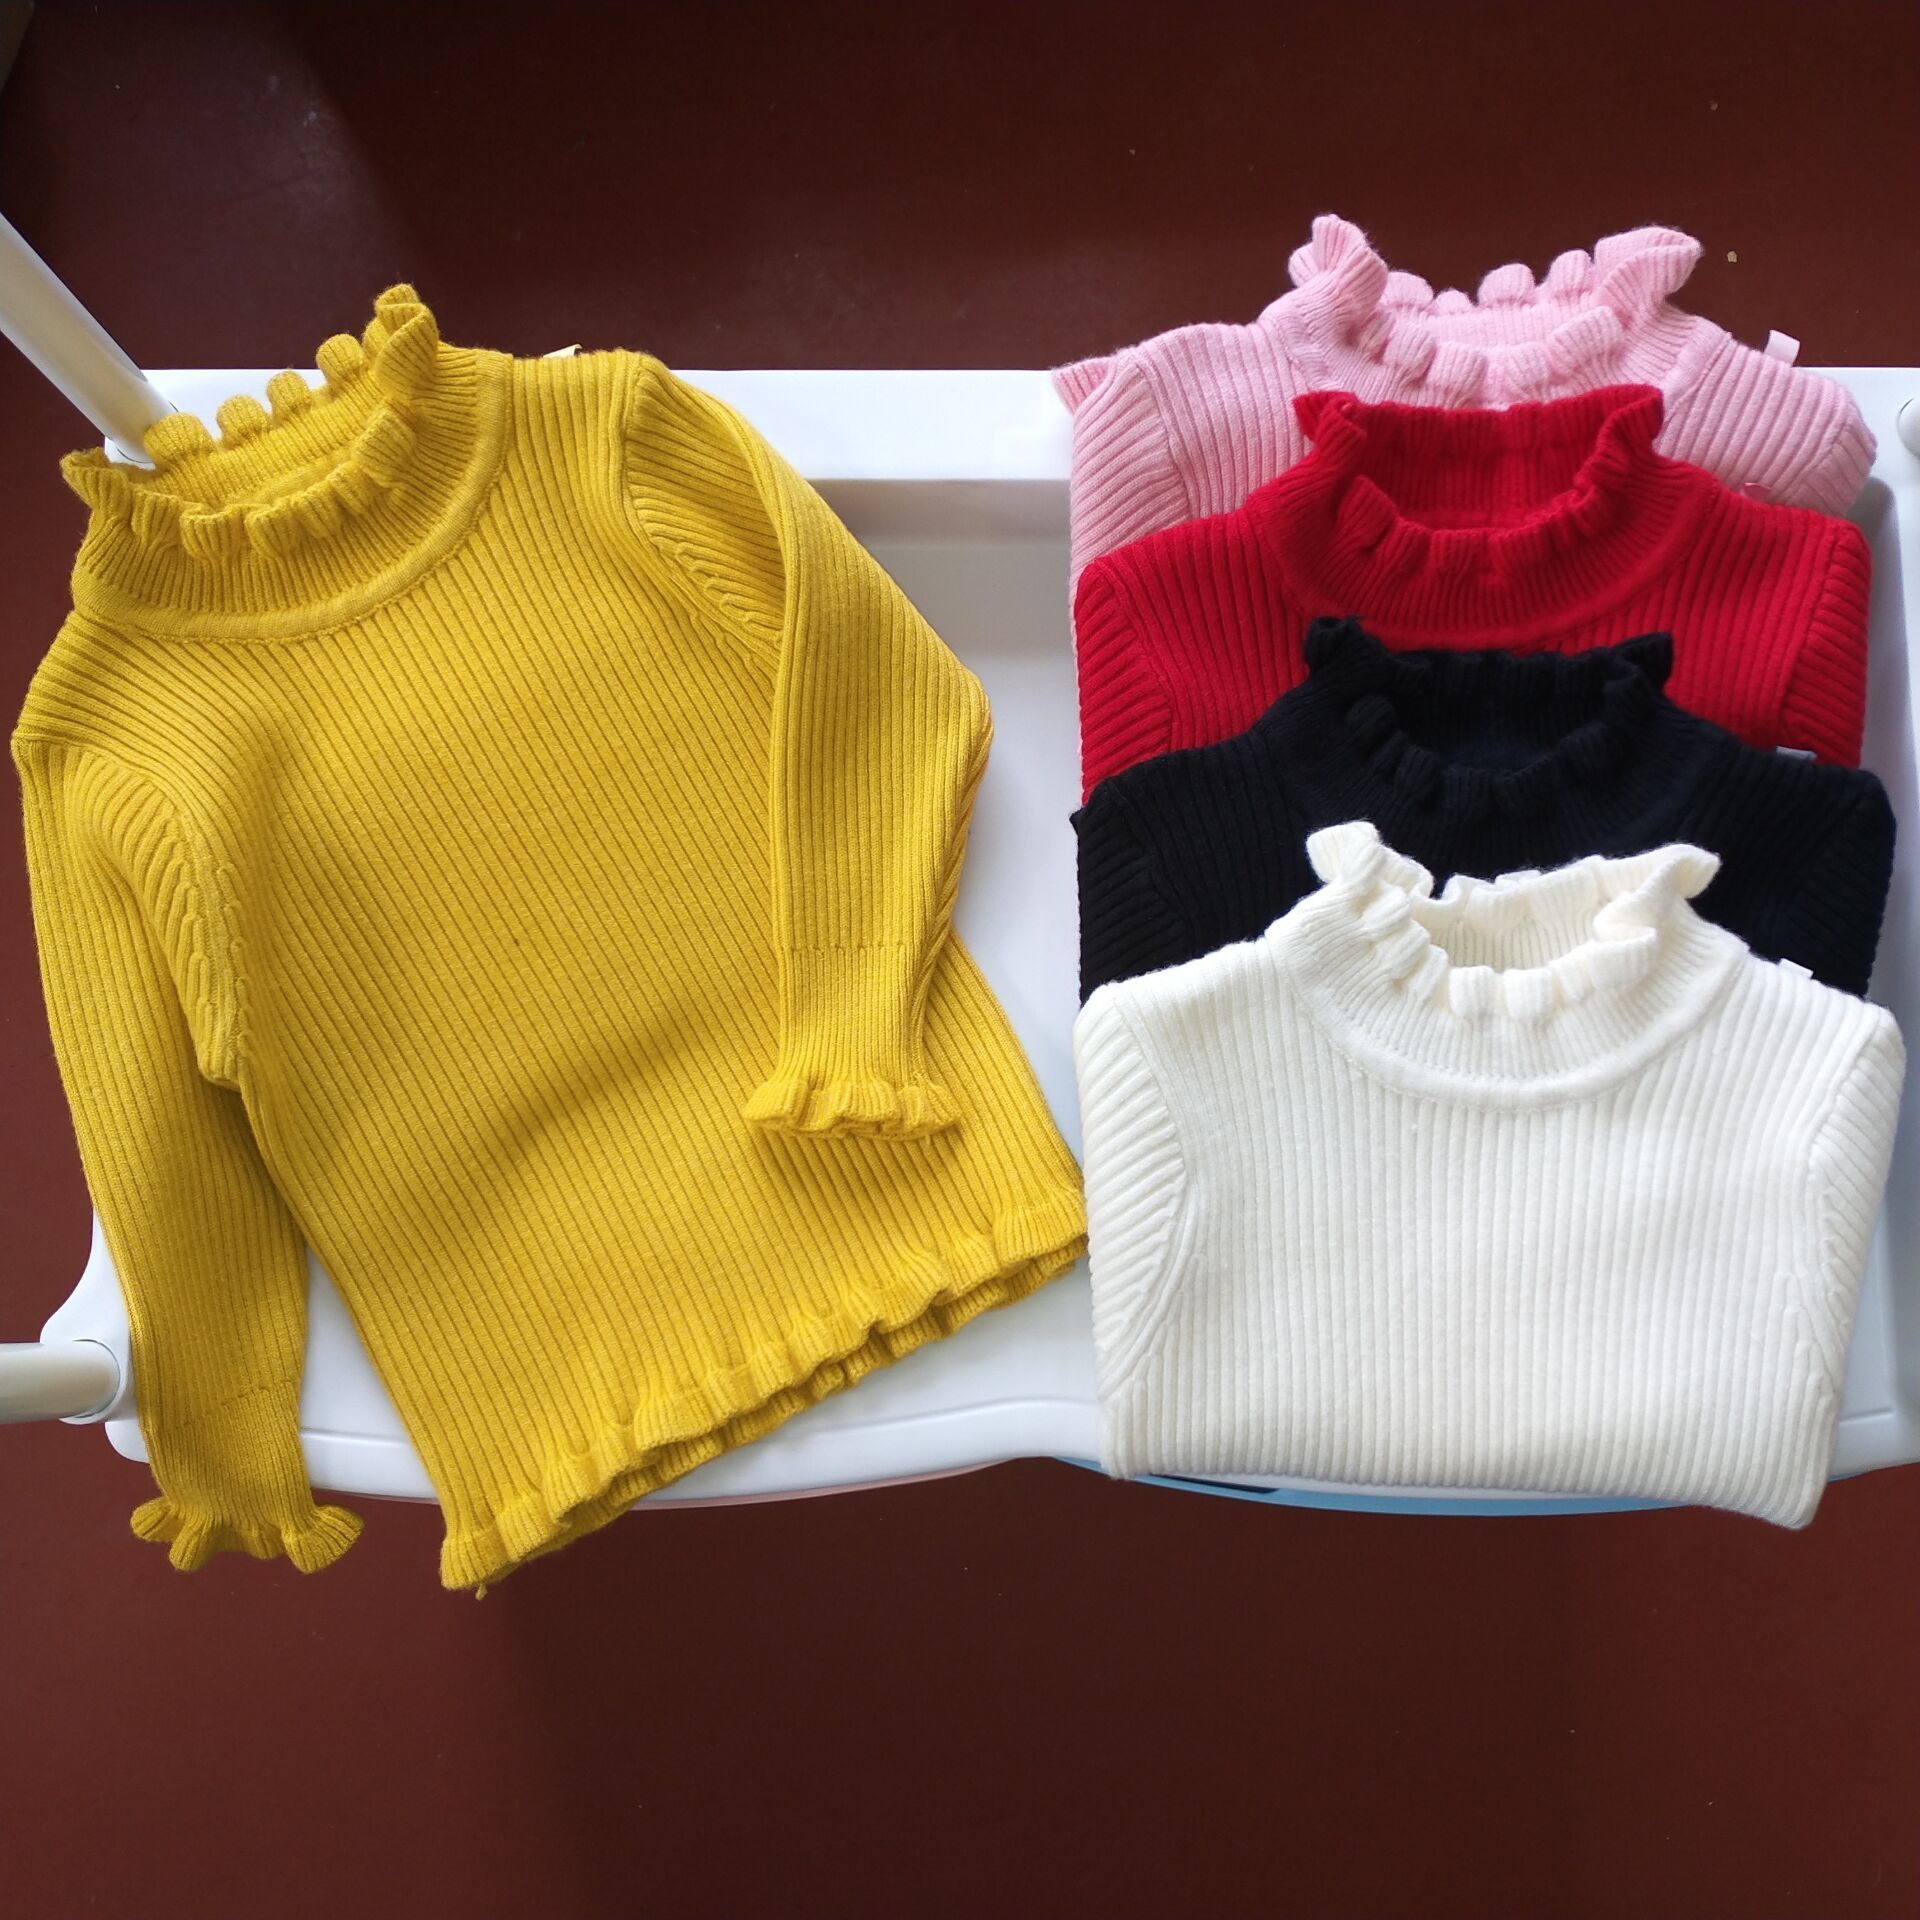 Children's sweater Ruffle Pullover children's knitwear baby girl's bottom sweater 0-6 years old girl's close fitting sweater